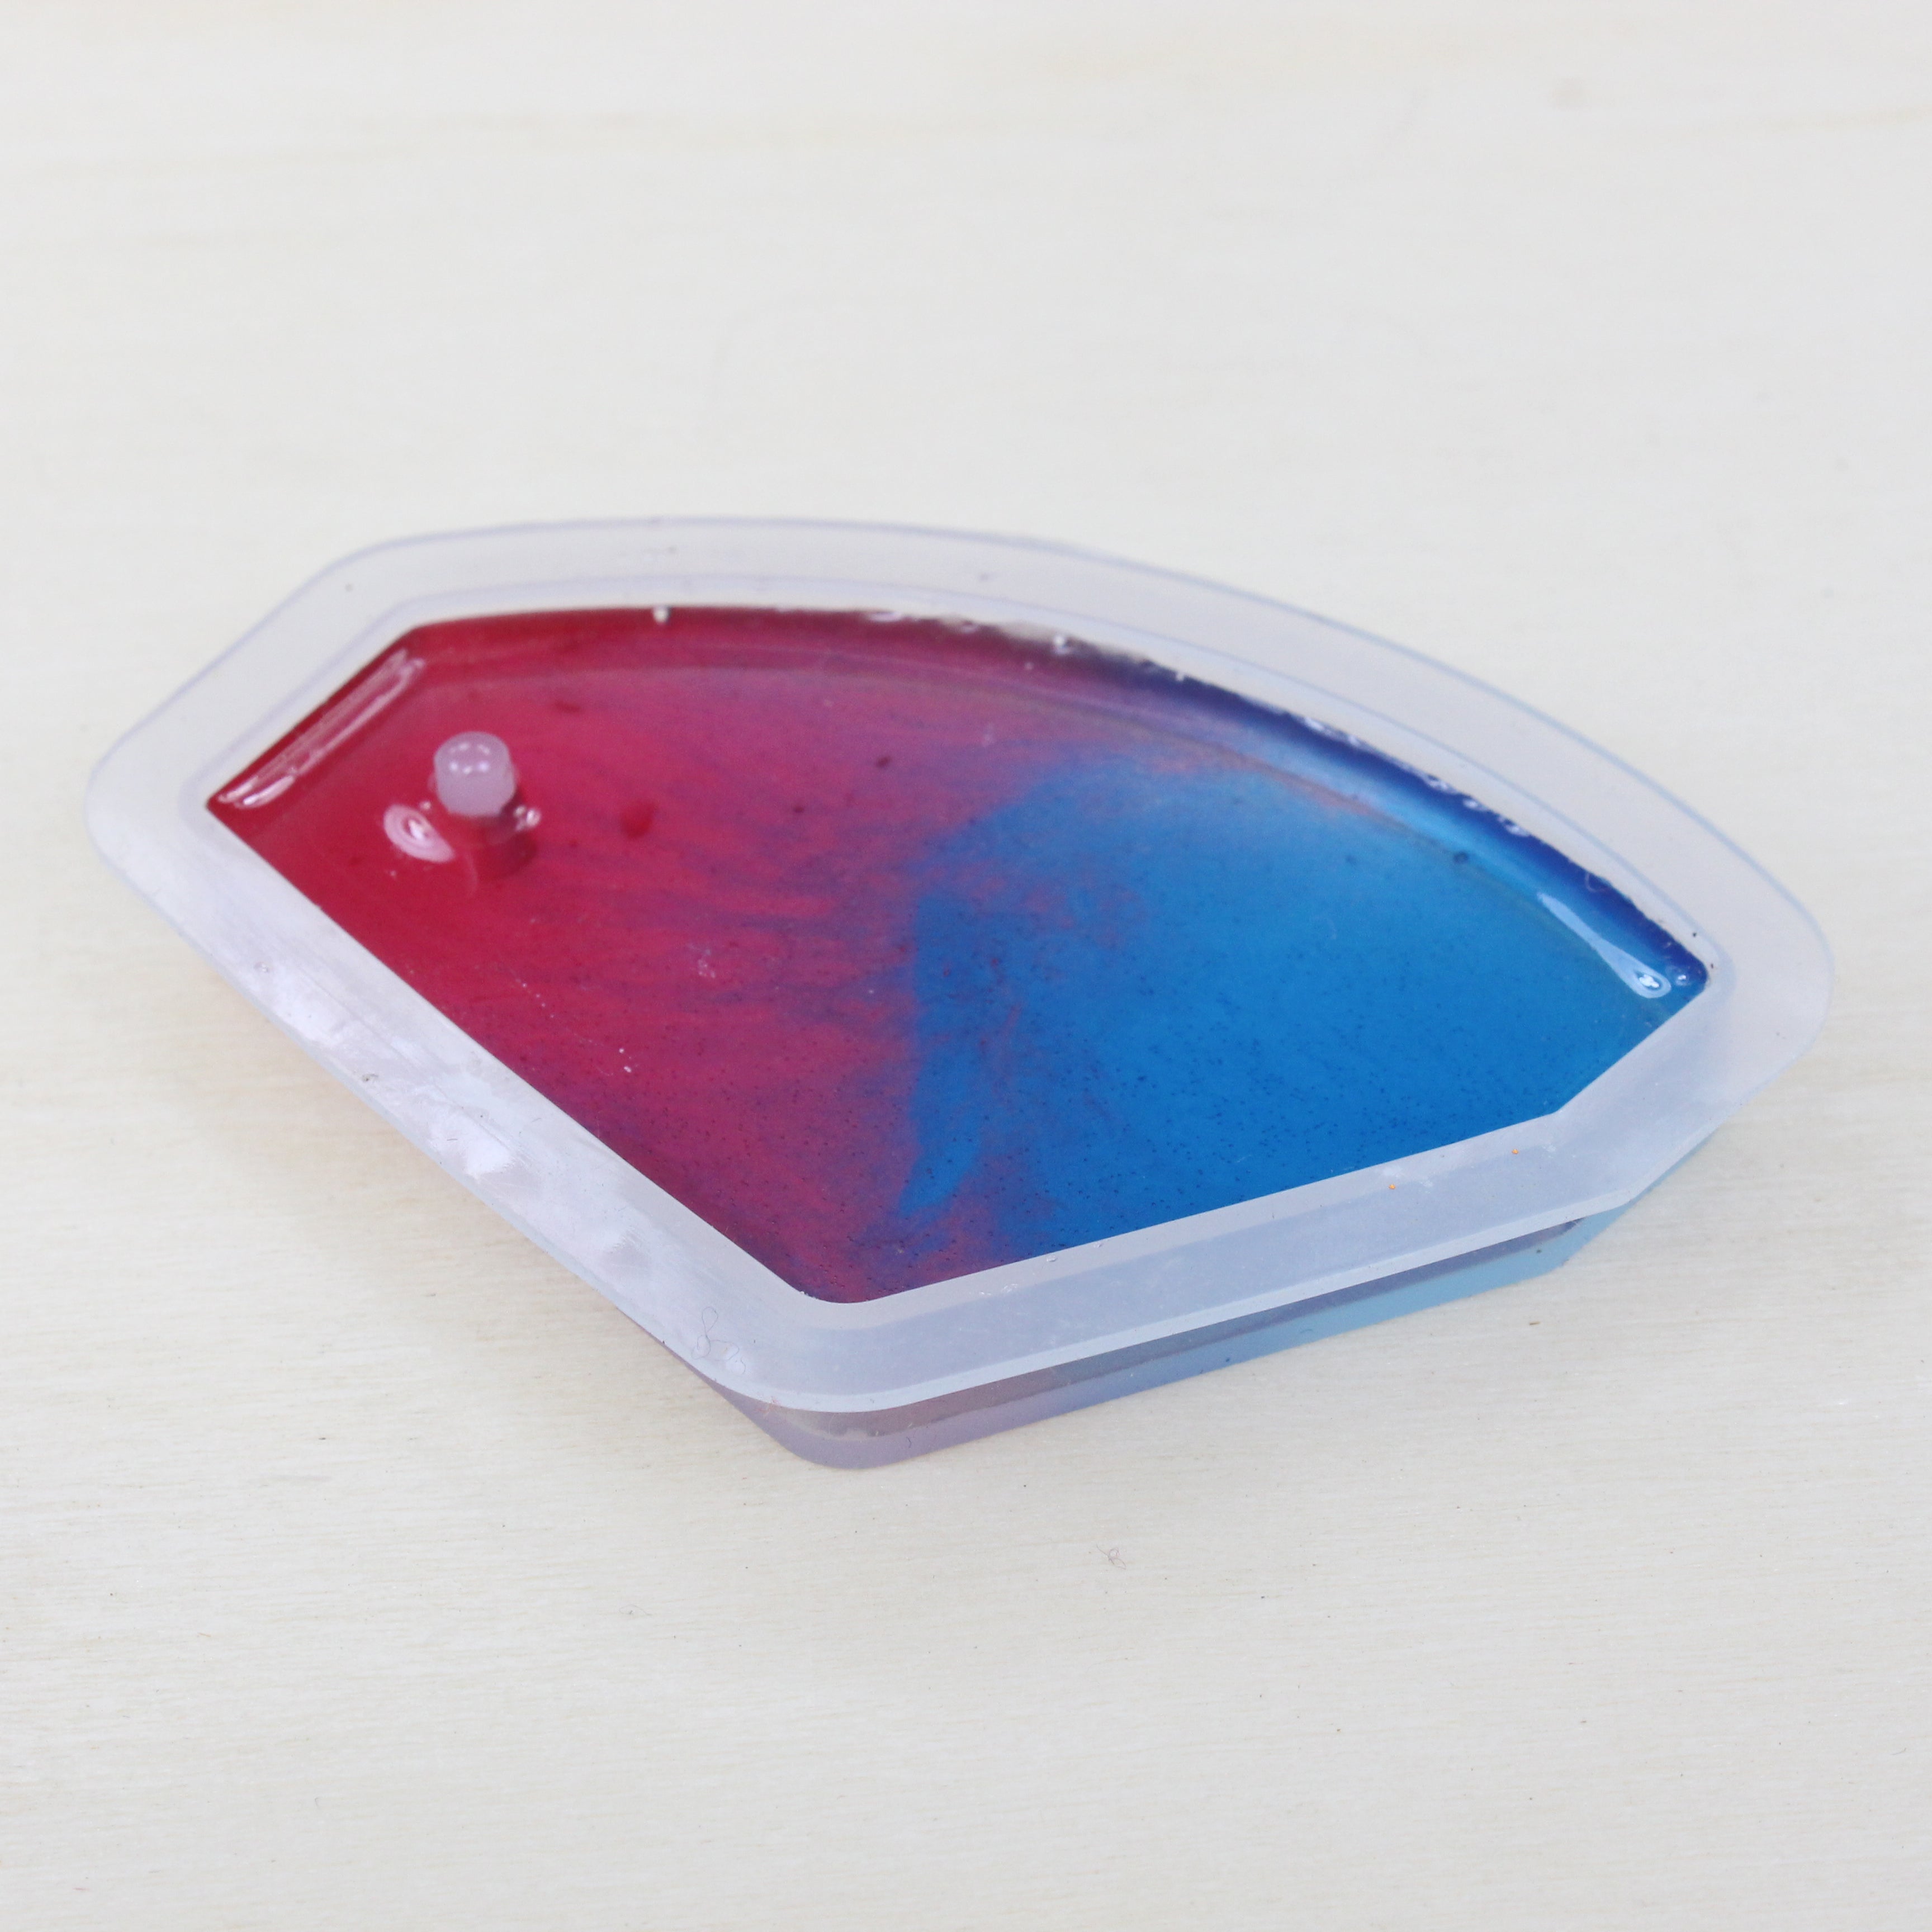 Resin Silicone Mould Pixie Pool 7.5cm X 5.3cm 1pc